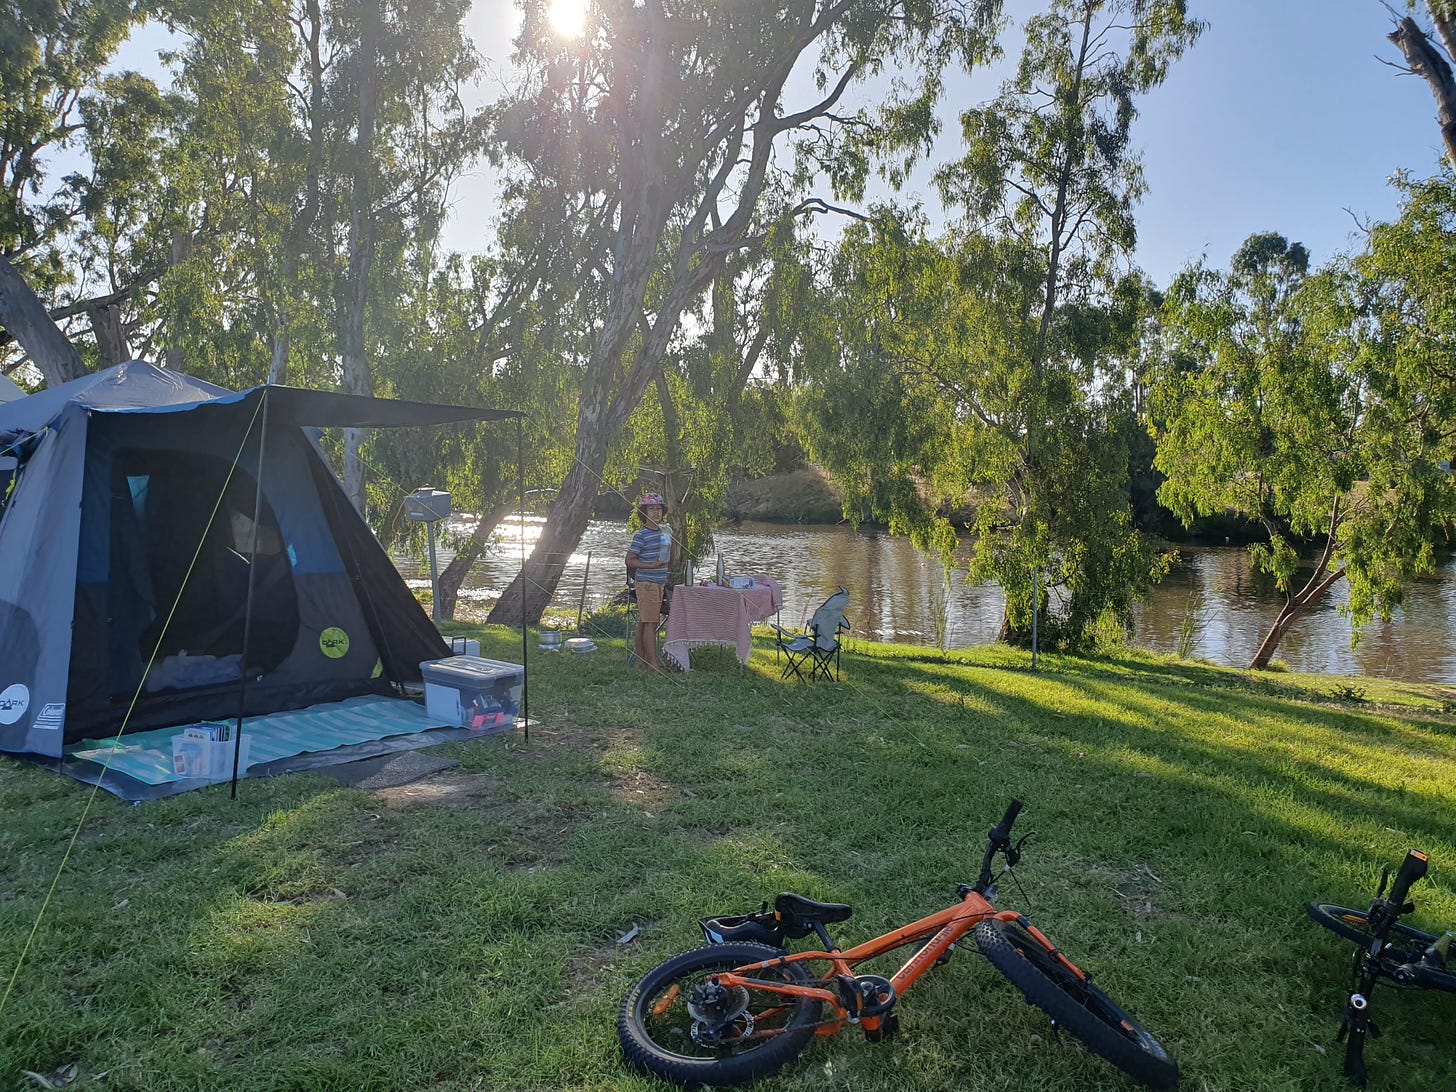 A tent by the river. In the foreground there are bikes on the grass and in the background a child beside a table and chair.